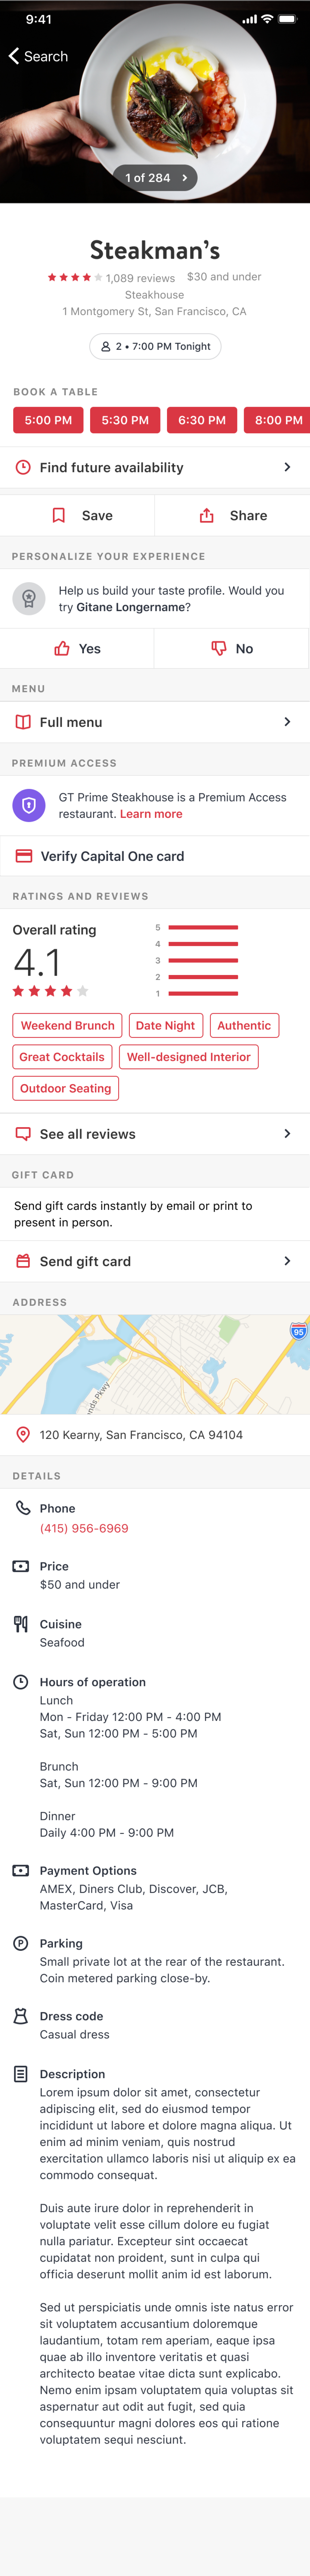 Toast and OpenTable Integration